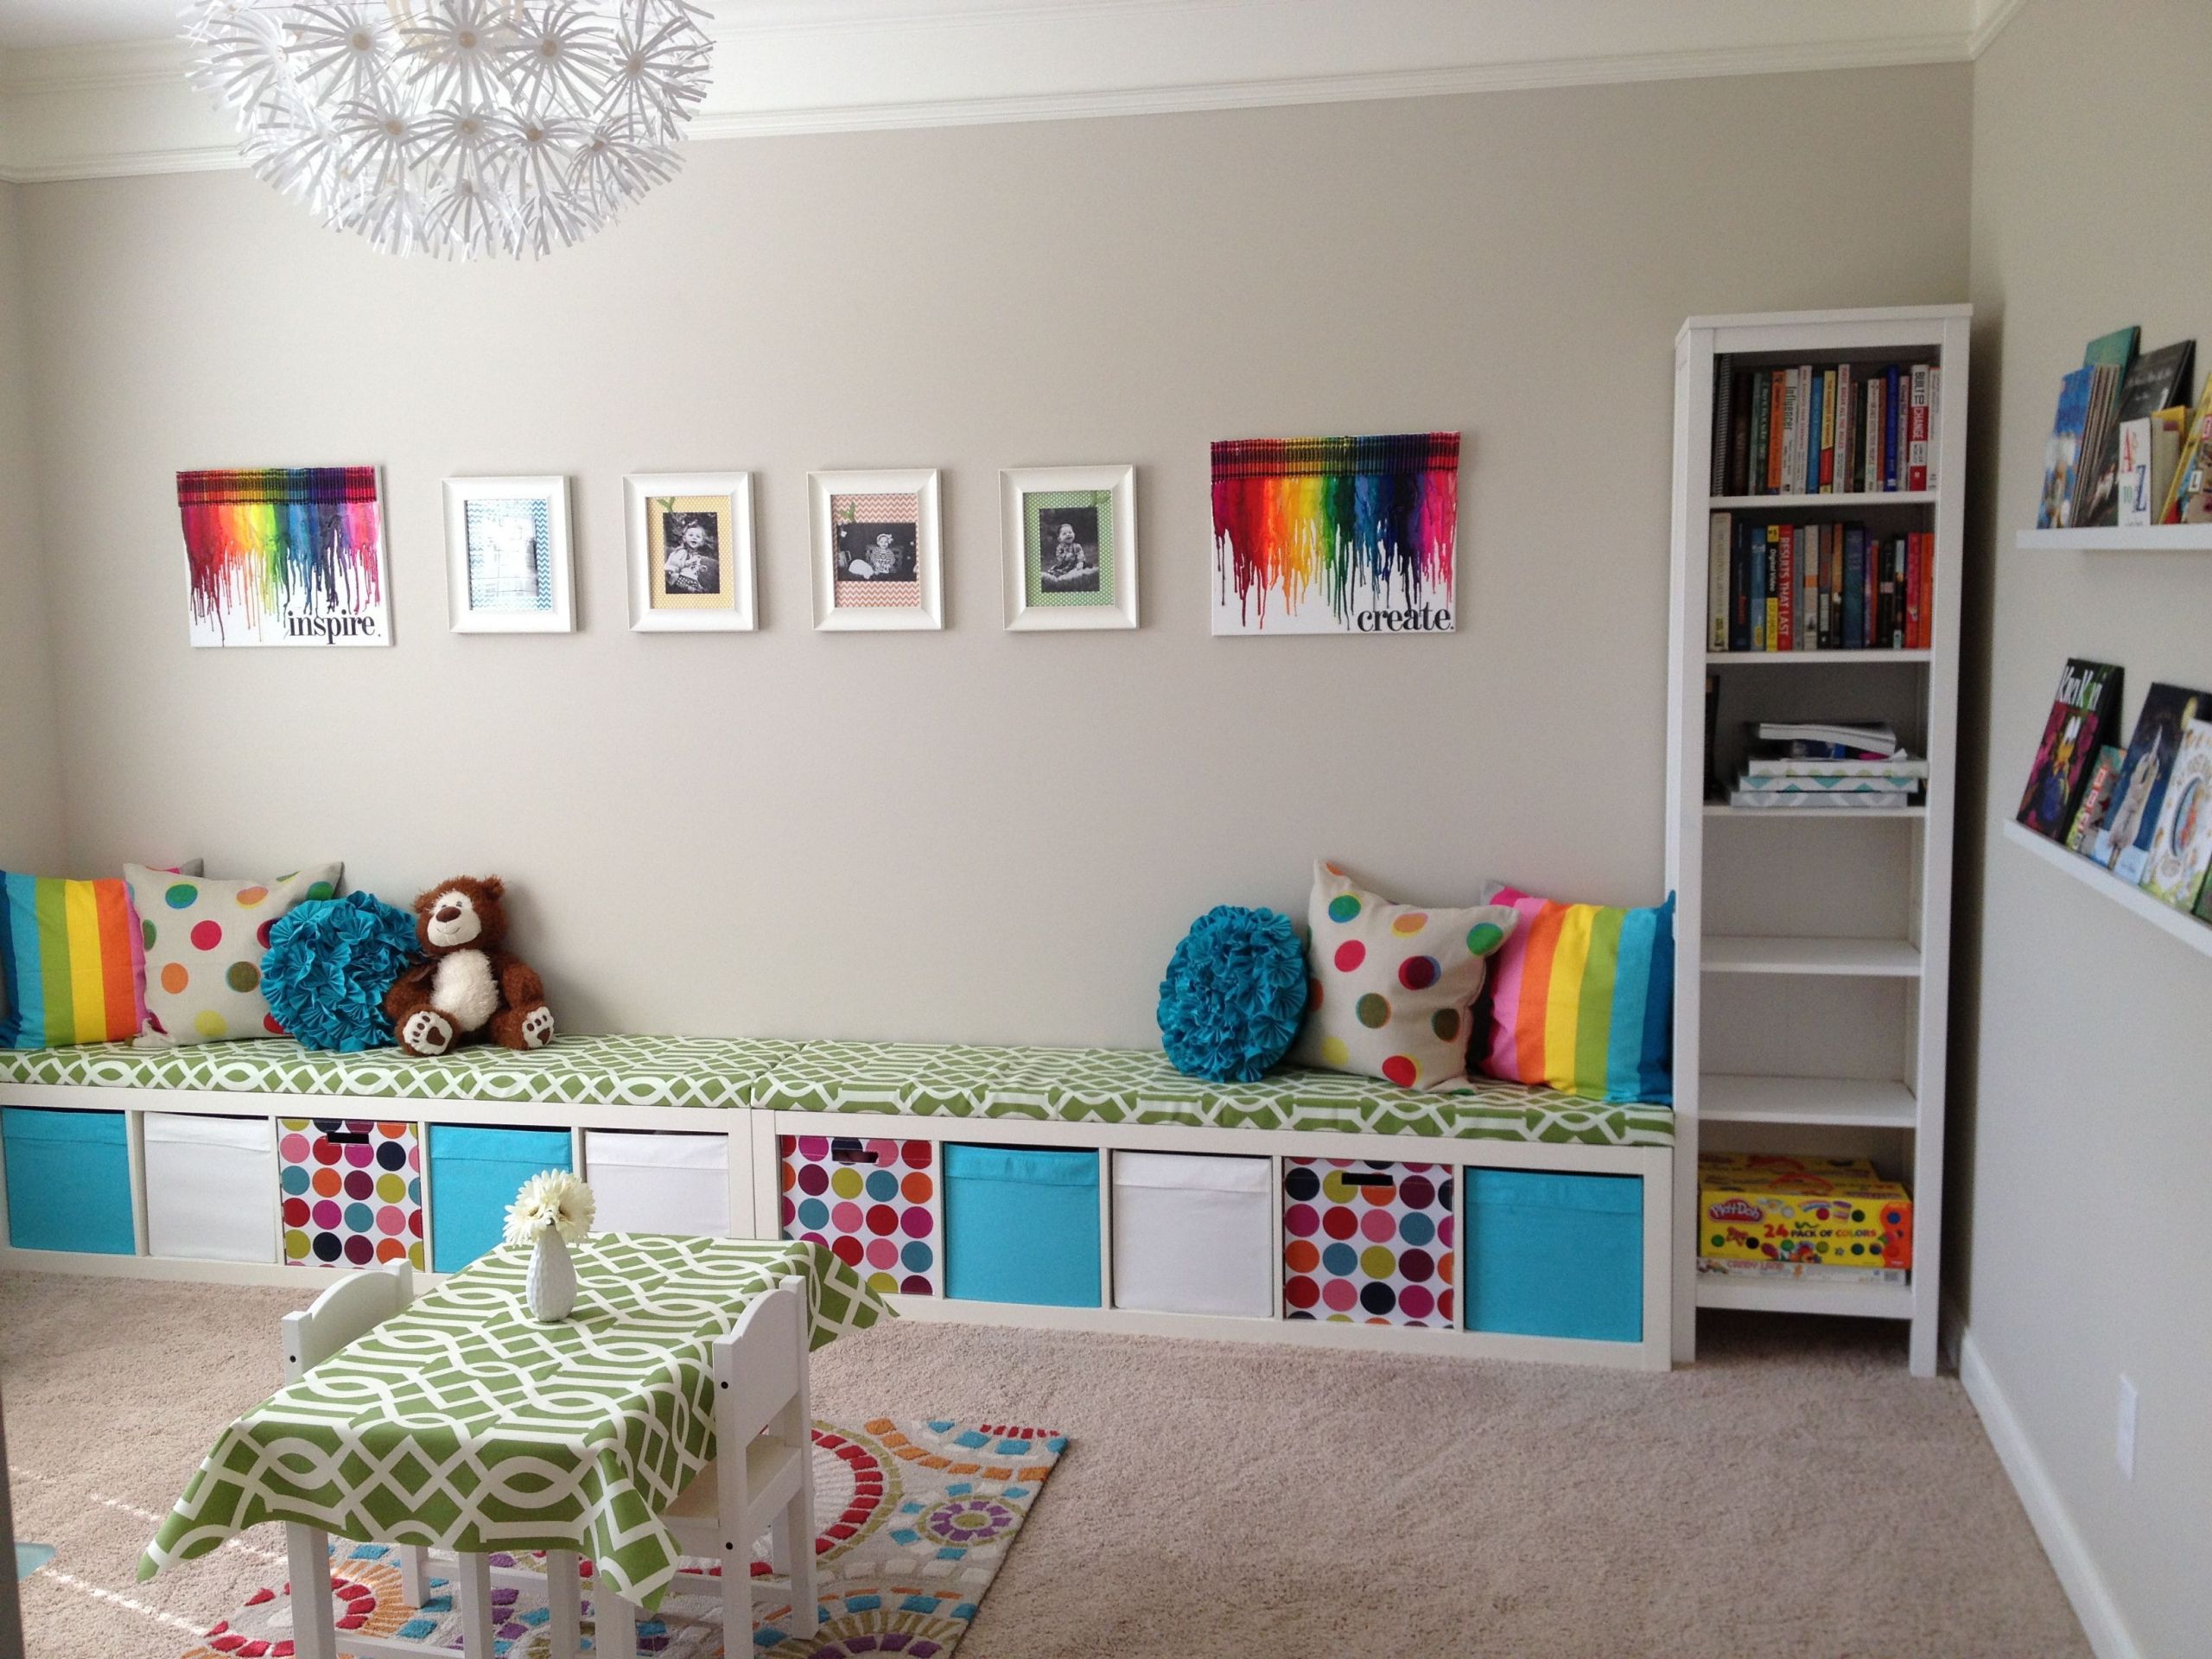 Kids Playroom Storage Ideas
 5 Smart and Creative Playroom Ideas on a Bud for the